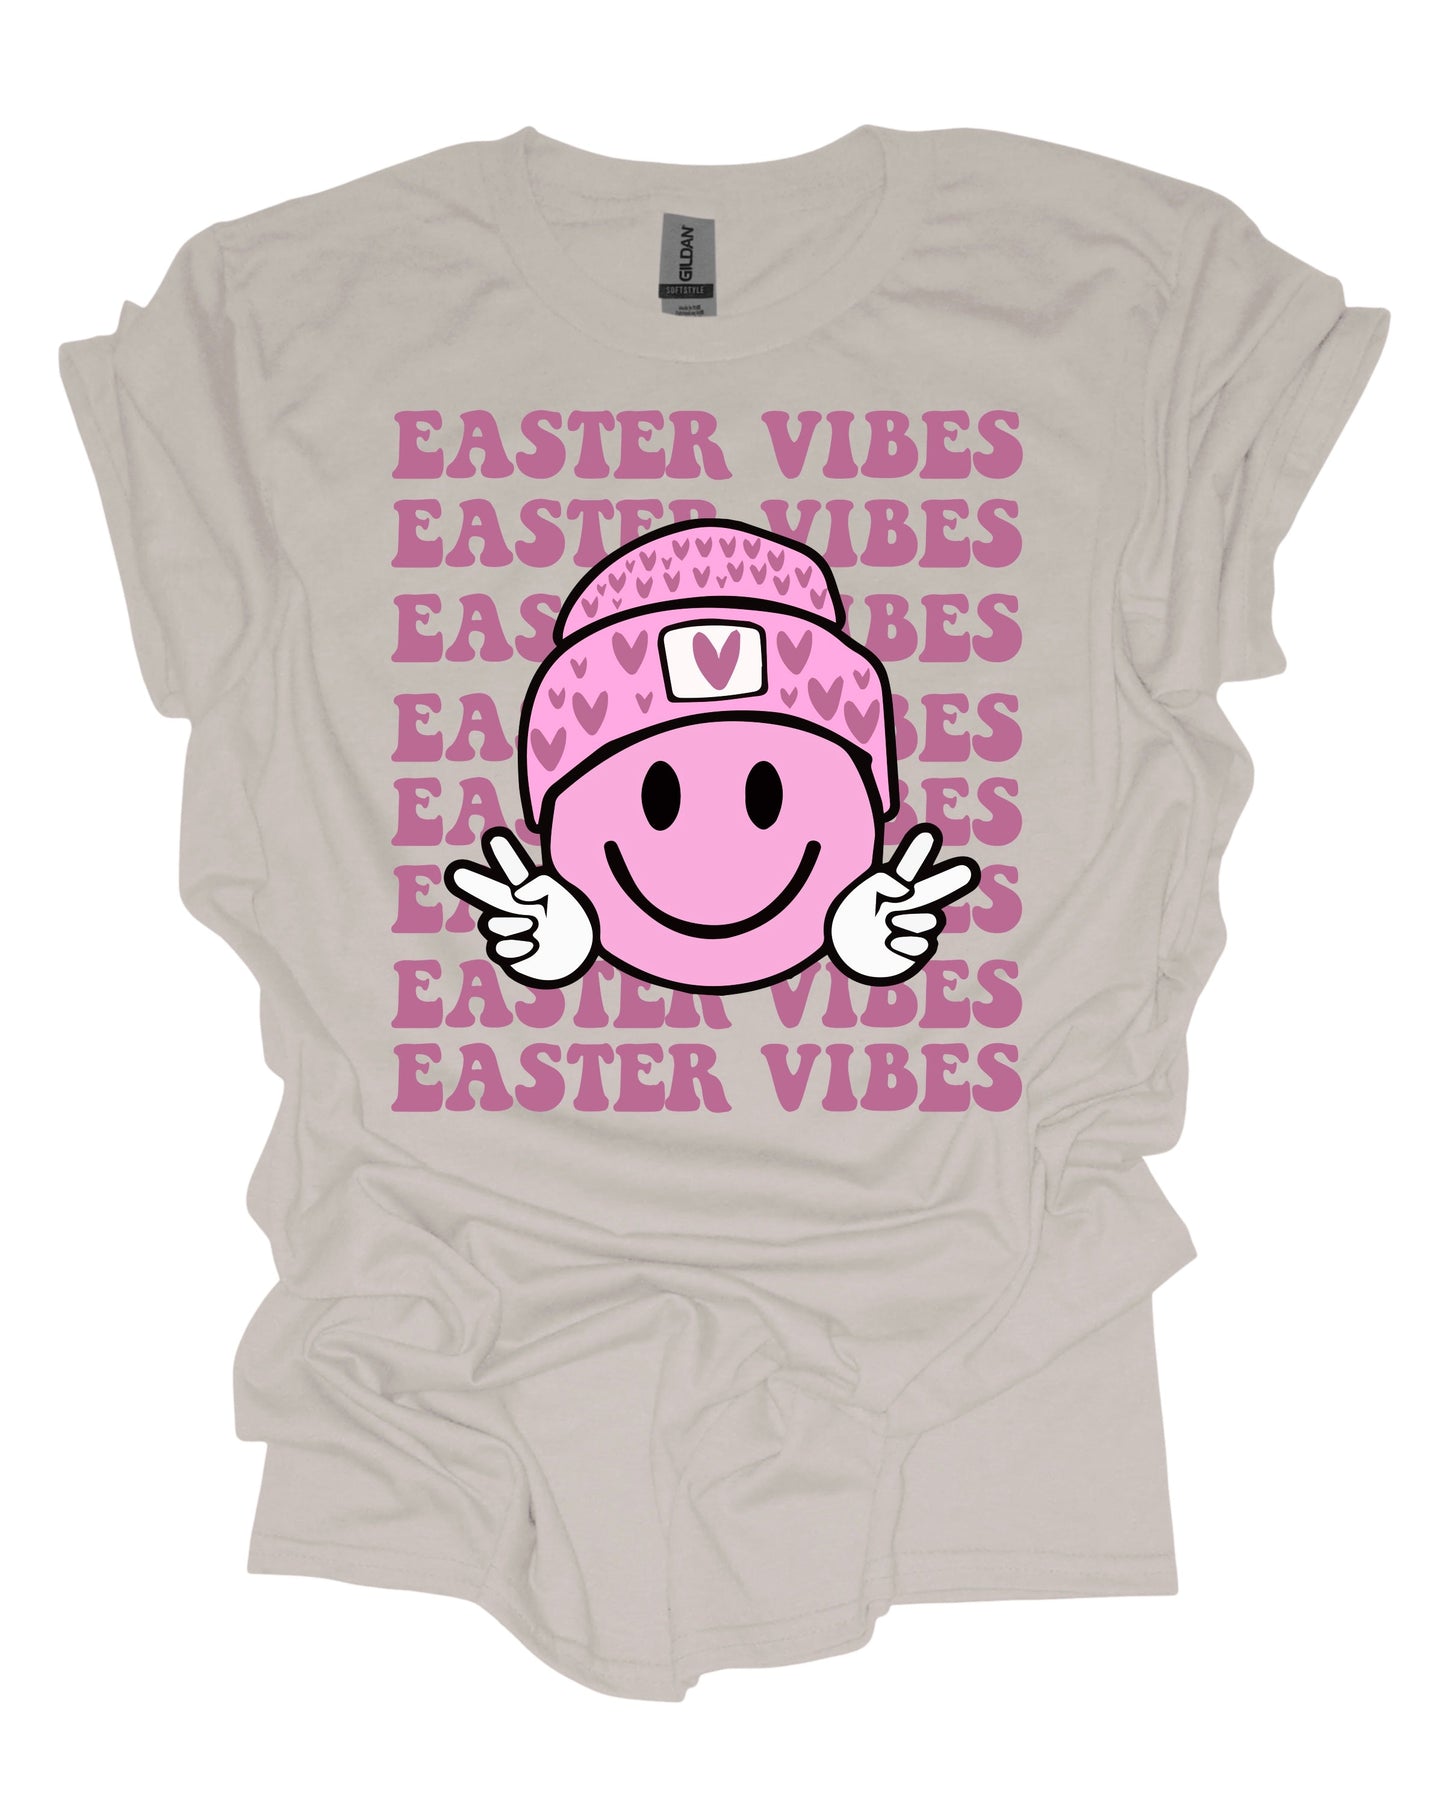 Easter Vibes smiley - T-Shirt